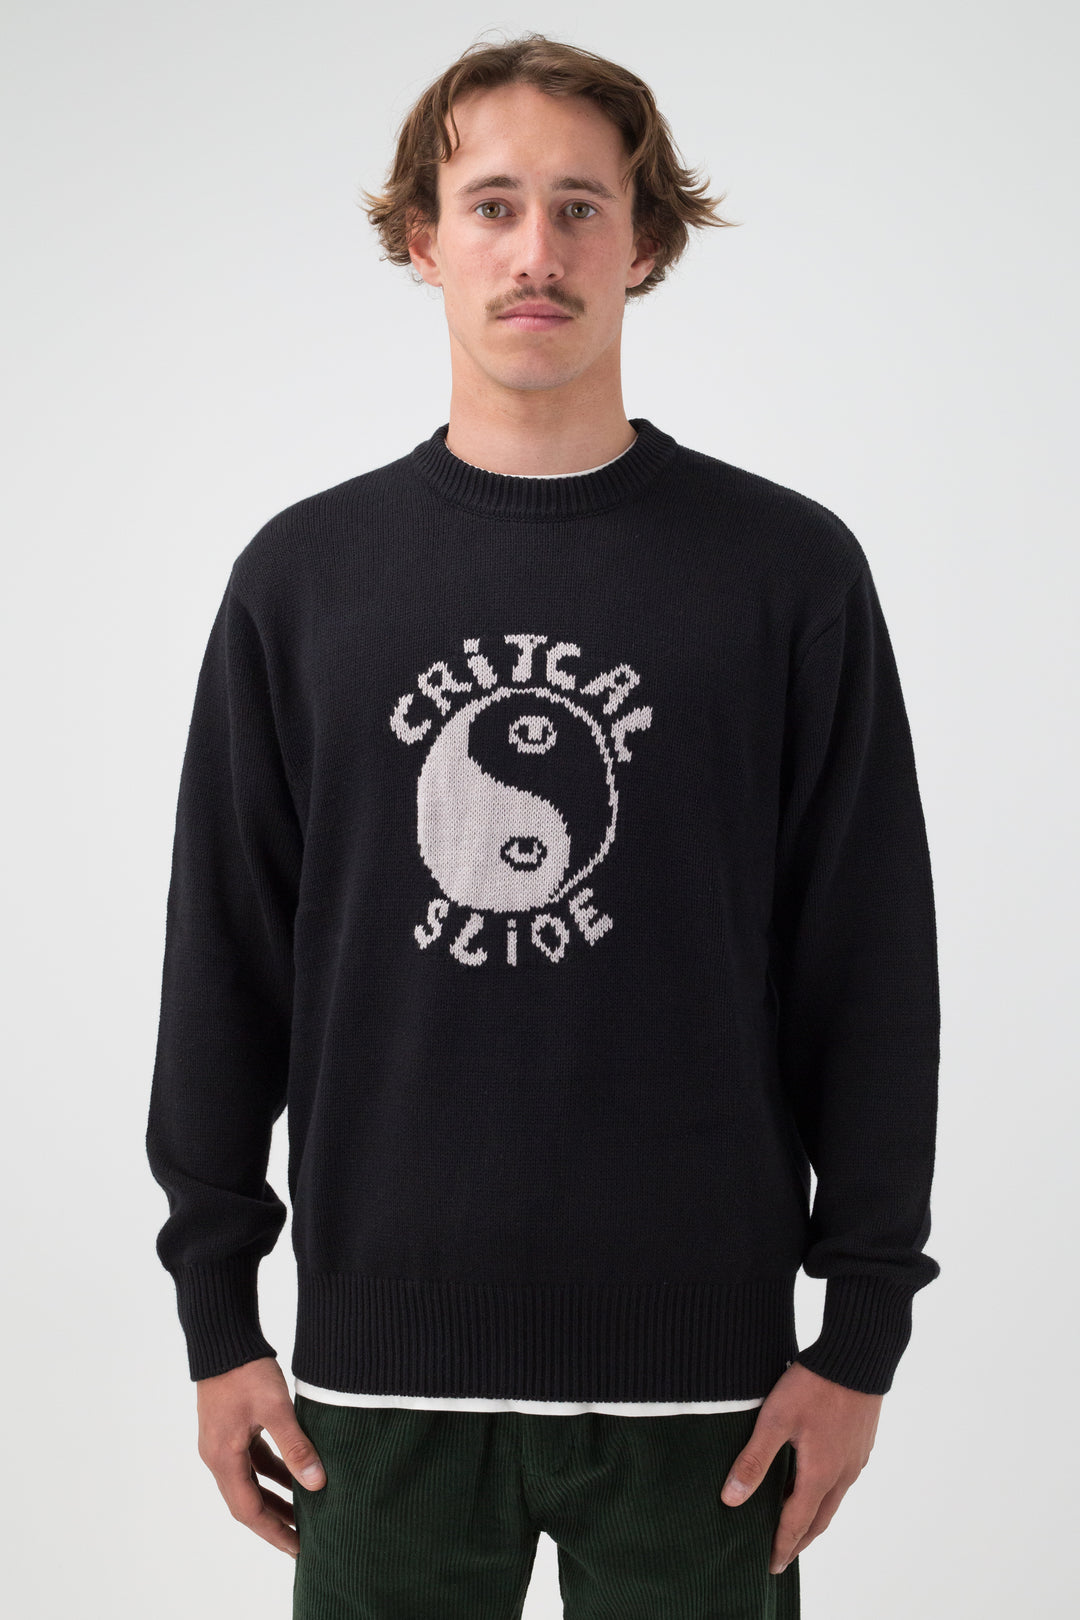 The Critical Slide Society Minds Eye Crew Knit